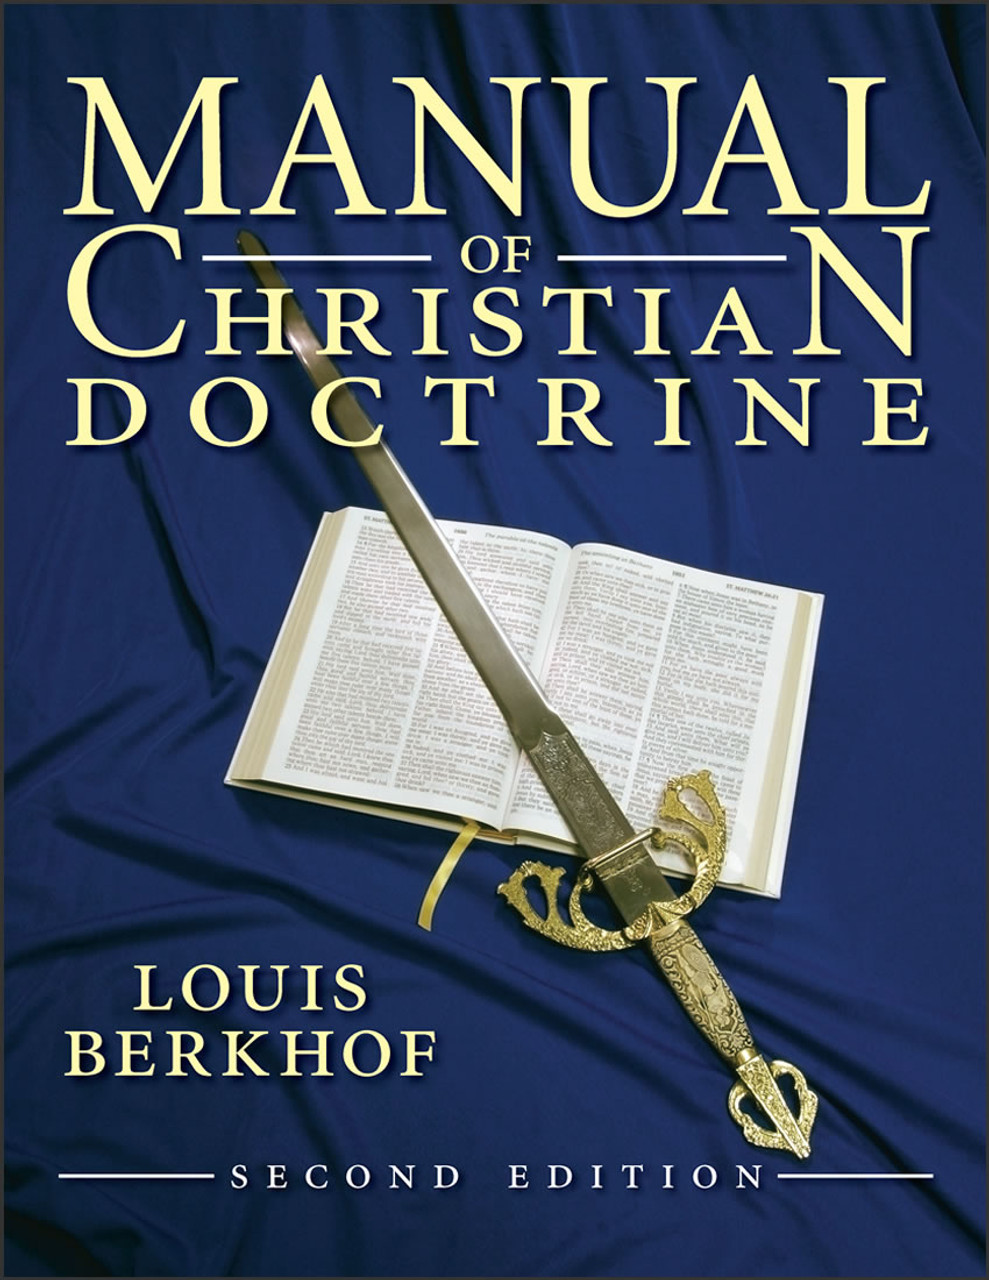 Manual of Christian Doctrine, 2nd edition